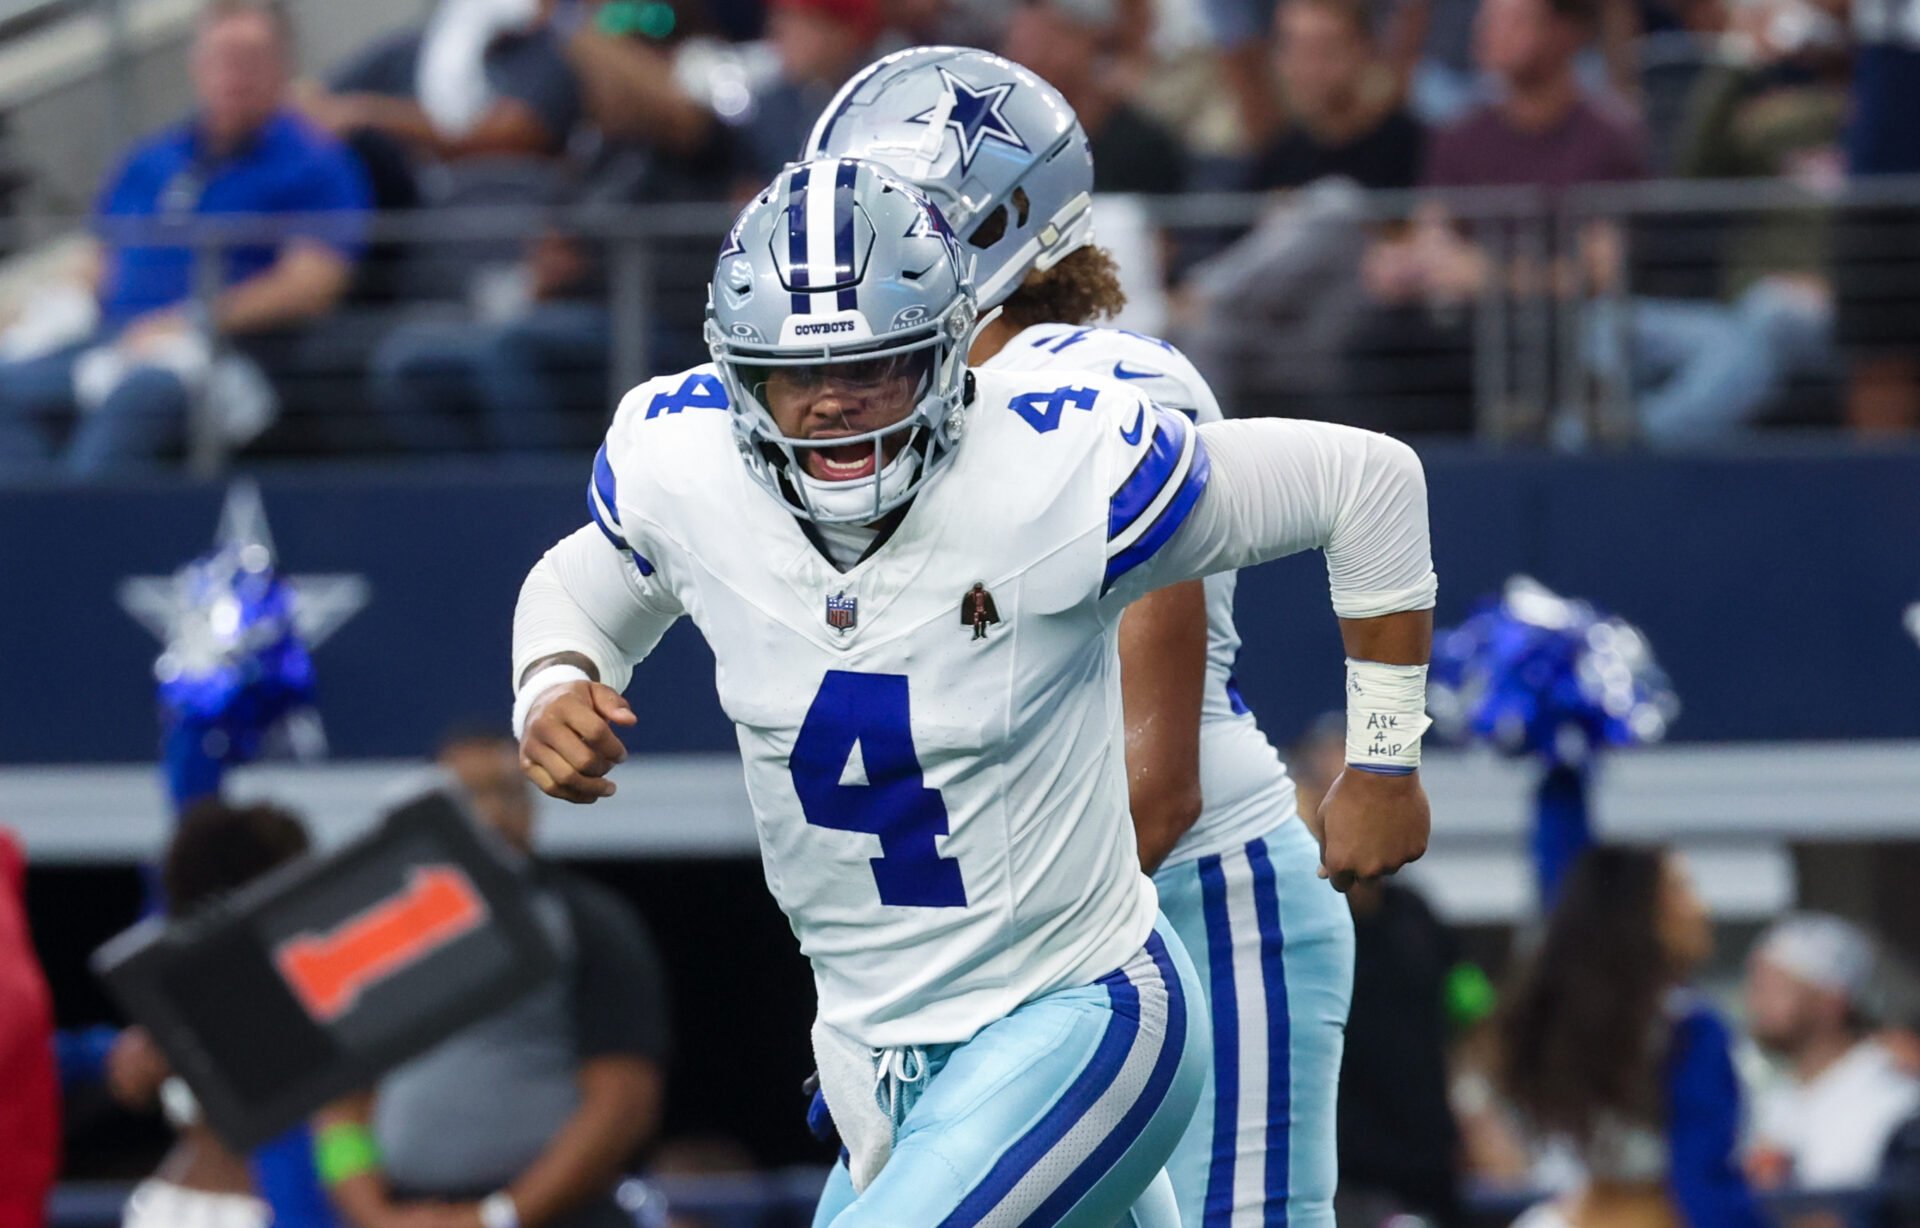 Dallas Cowboys quarterback Dak Prescott (4) celebrates after throwing a touchdown pass during the first quarter against the New England Patriots at AT&T Stadium.